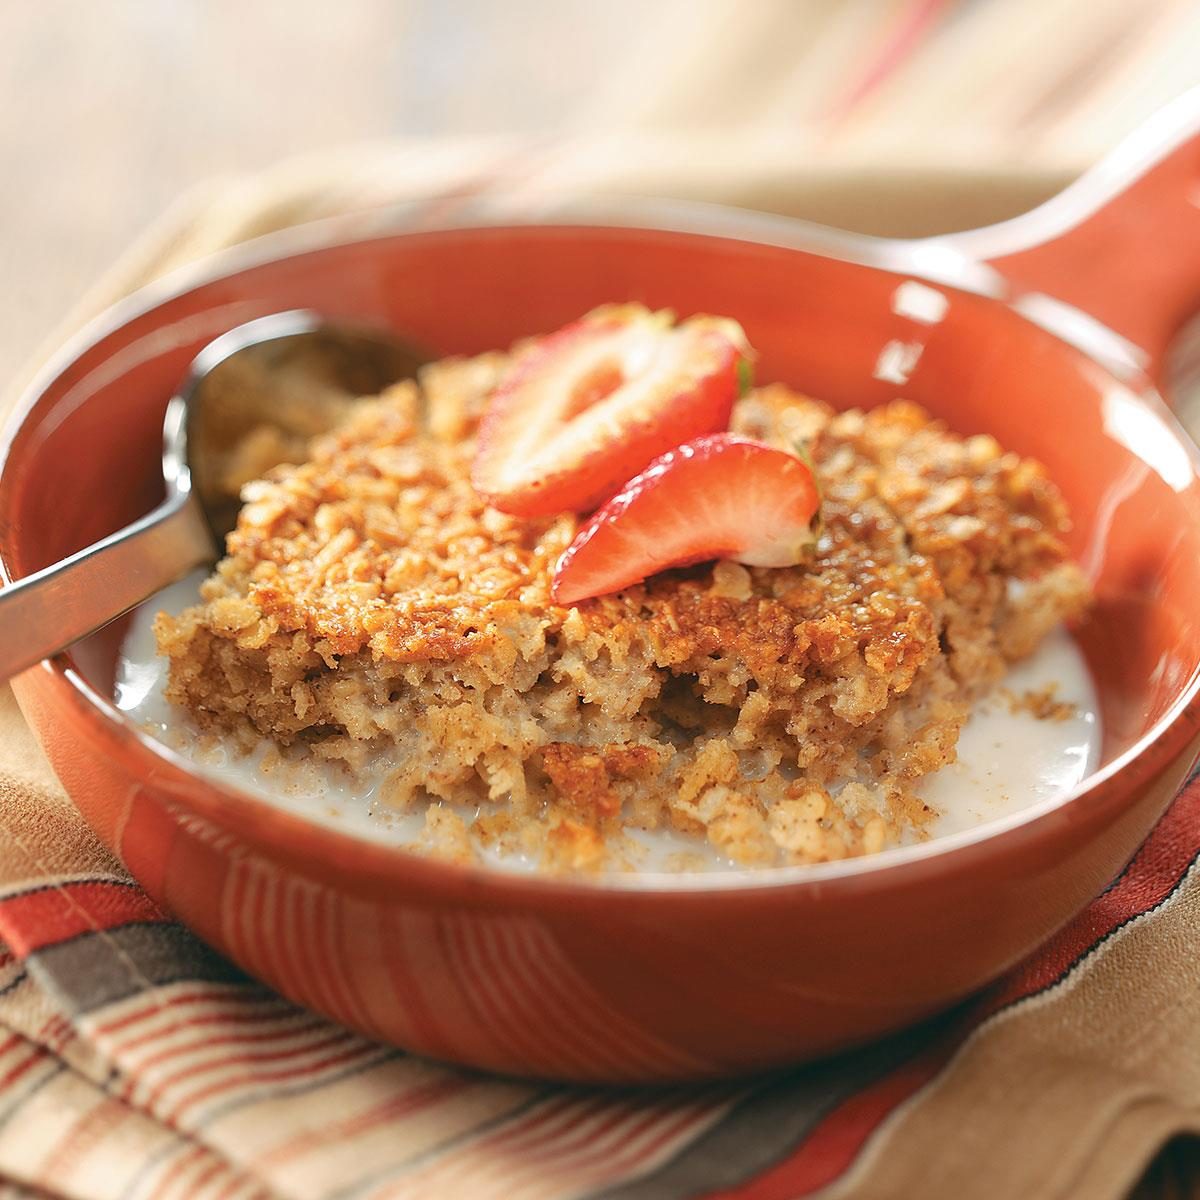 https://www.tasteofhome.com/wp-content/uploads/2018/01/Baked-Oatmeal_exps2346_W101973175C05_12_4bC_RMS-1.jpg